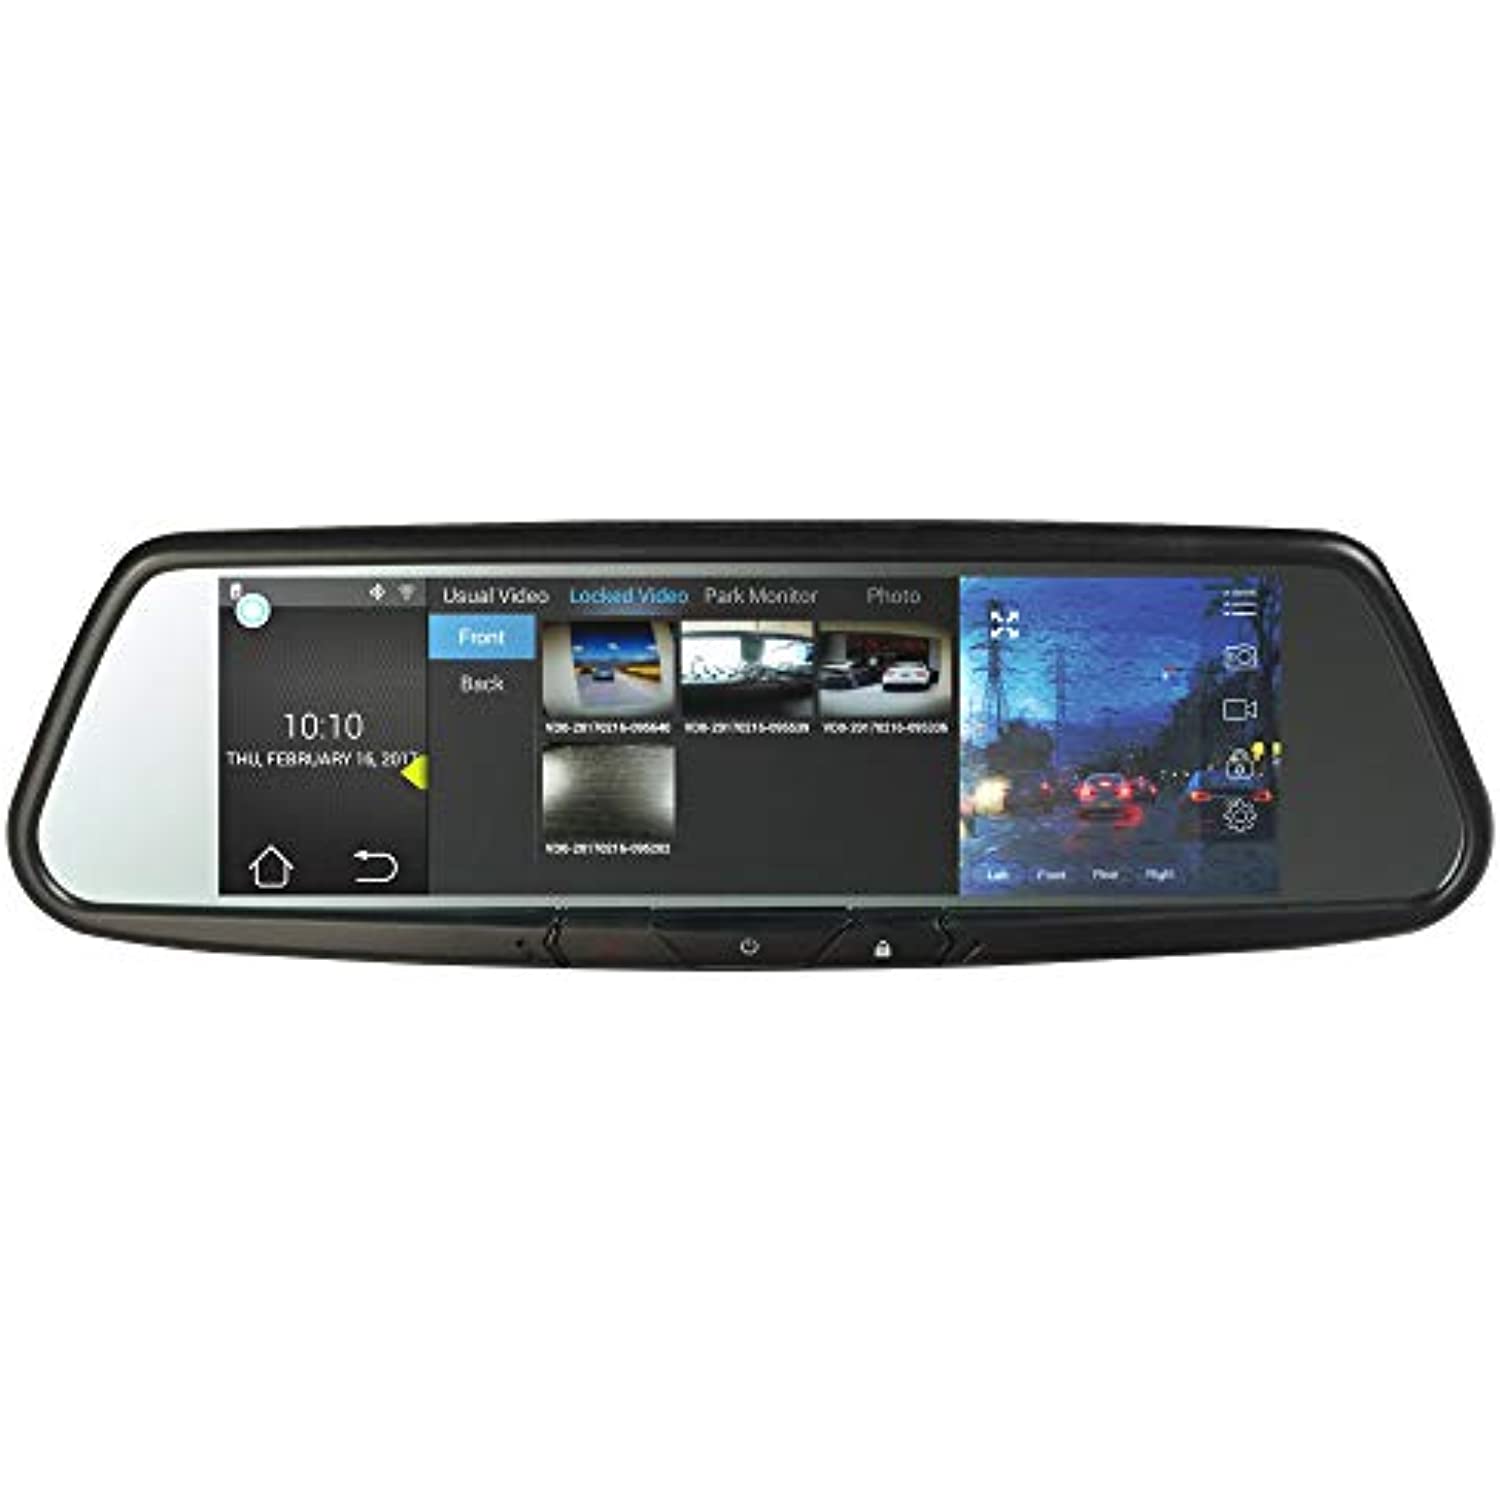 Advent RVM740SMN Android Based Full View Replacement Smart Rear View Mirror w/7.8" Monitor with Navigation